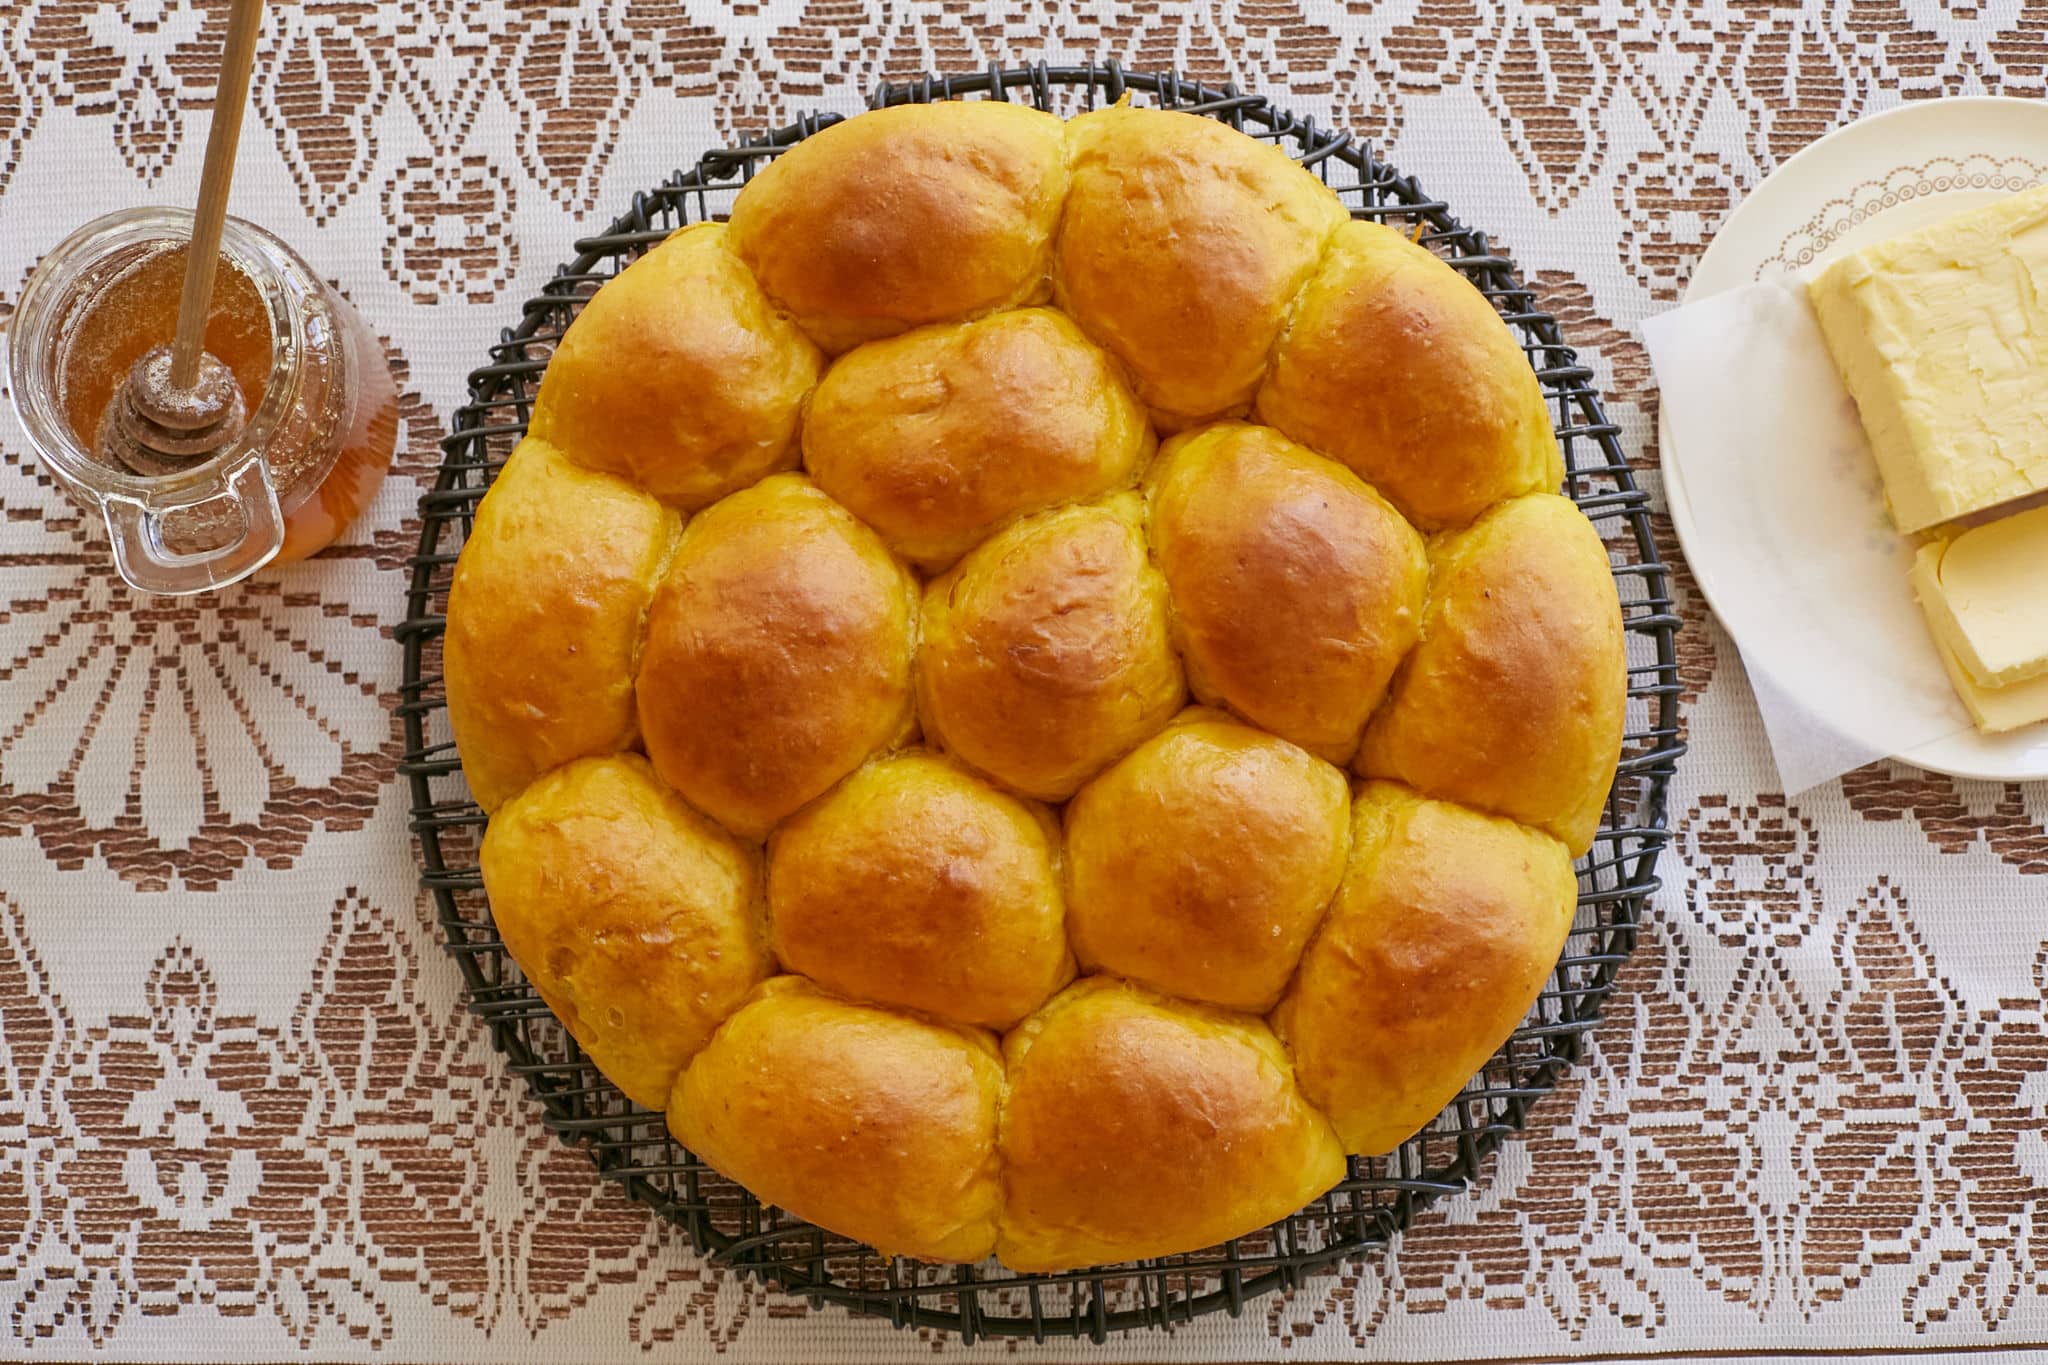 Homemade pumpkin bread rolls are baked in a circular tin. The tops are golden brown and they have risen and cooked to be stuck together.